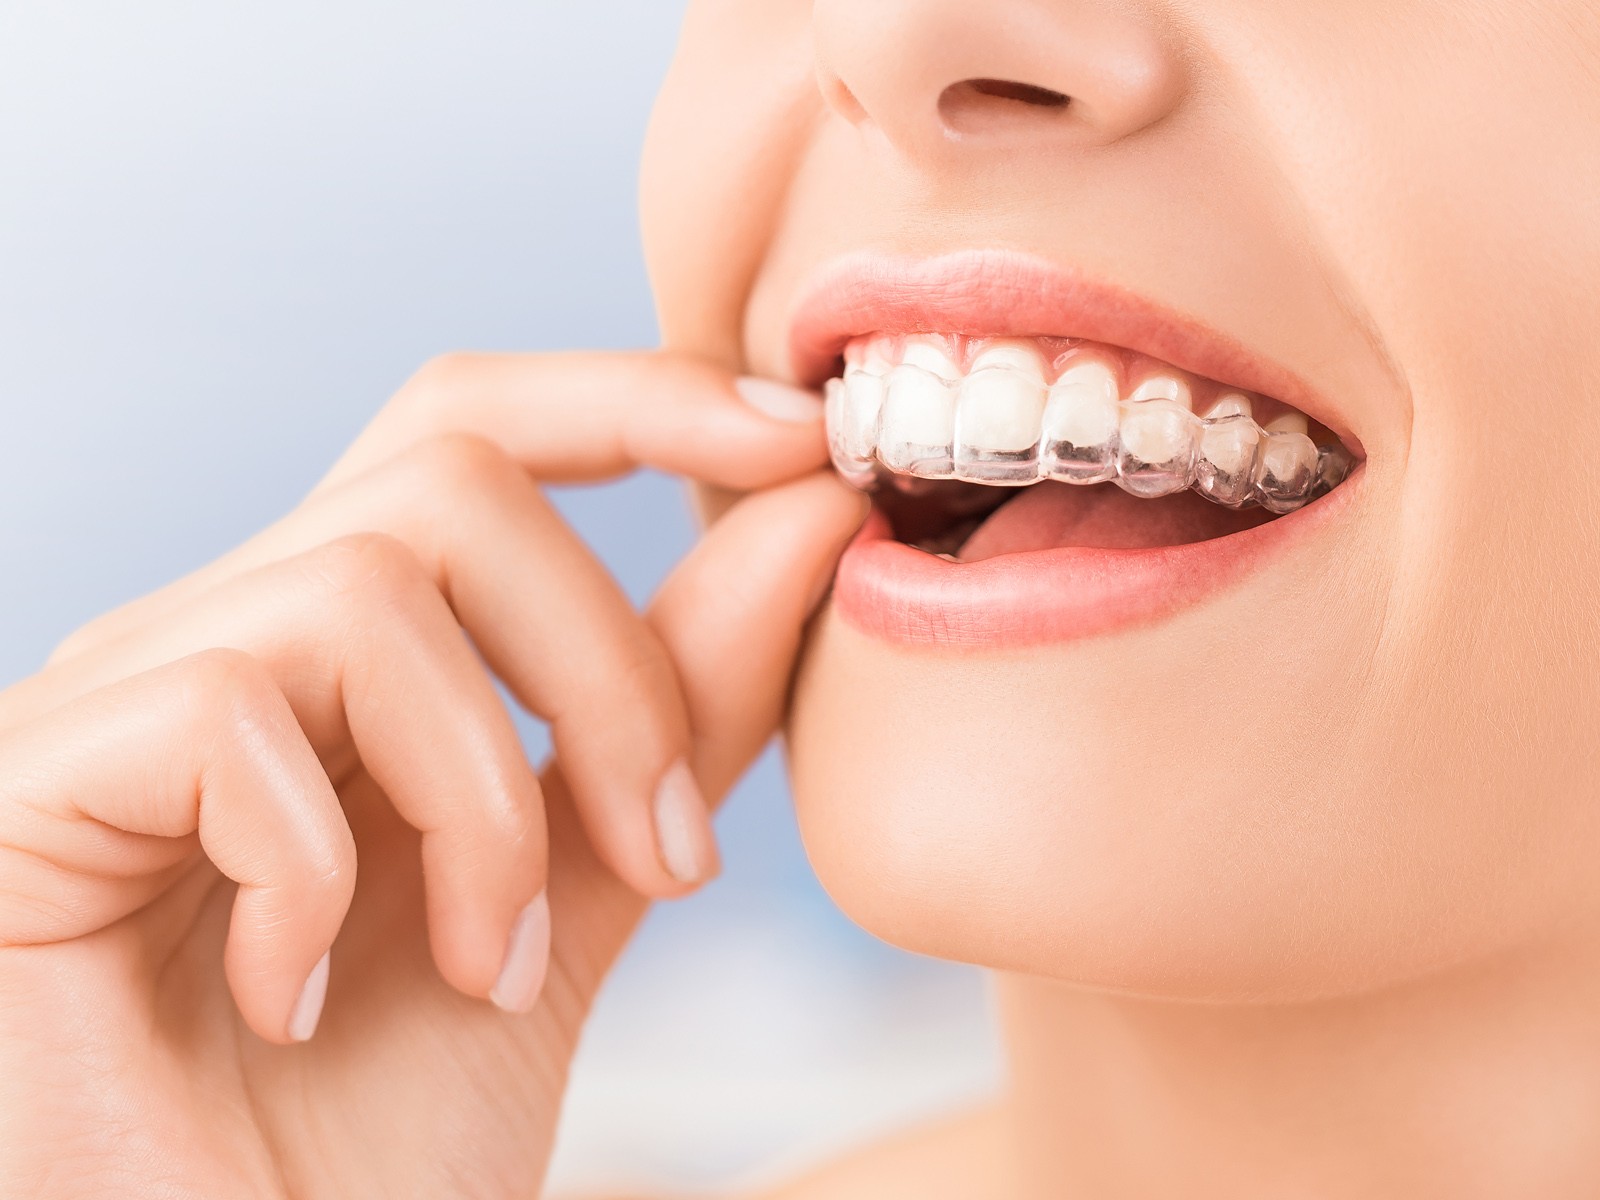 Does your jaw change with Invisalign?